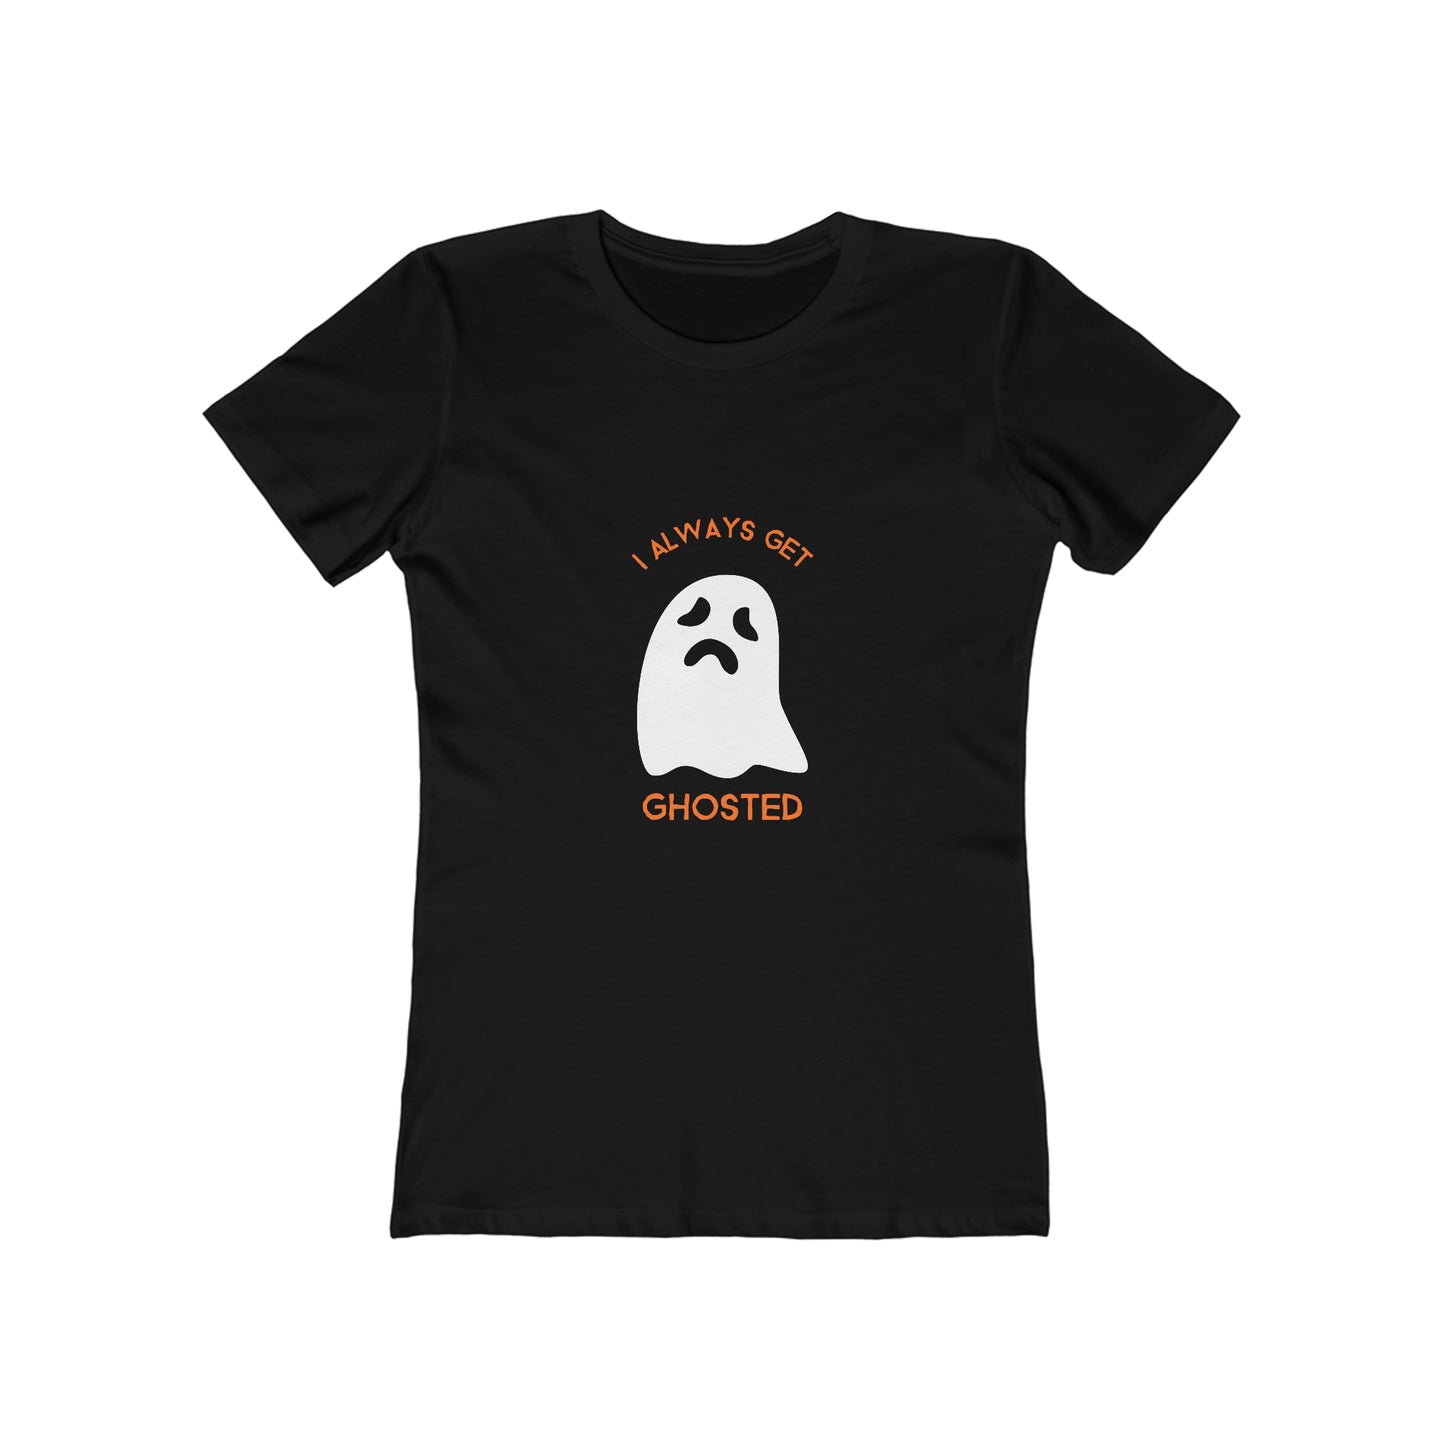 Pumpkin Spice And Everything Nice - Women's T-shirt